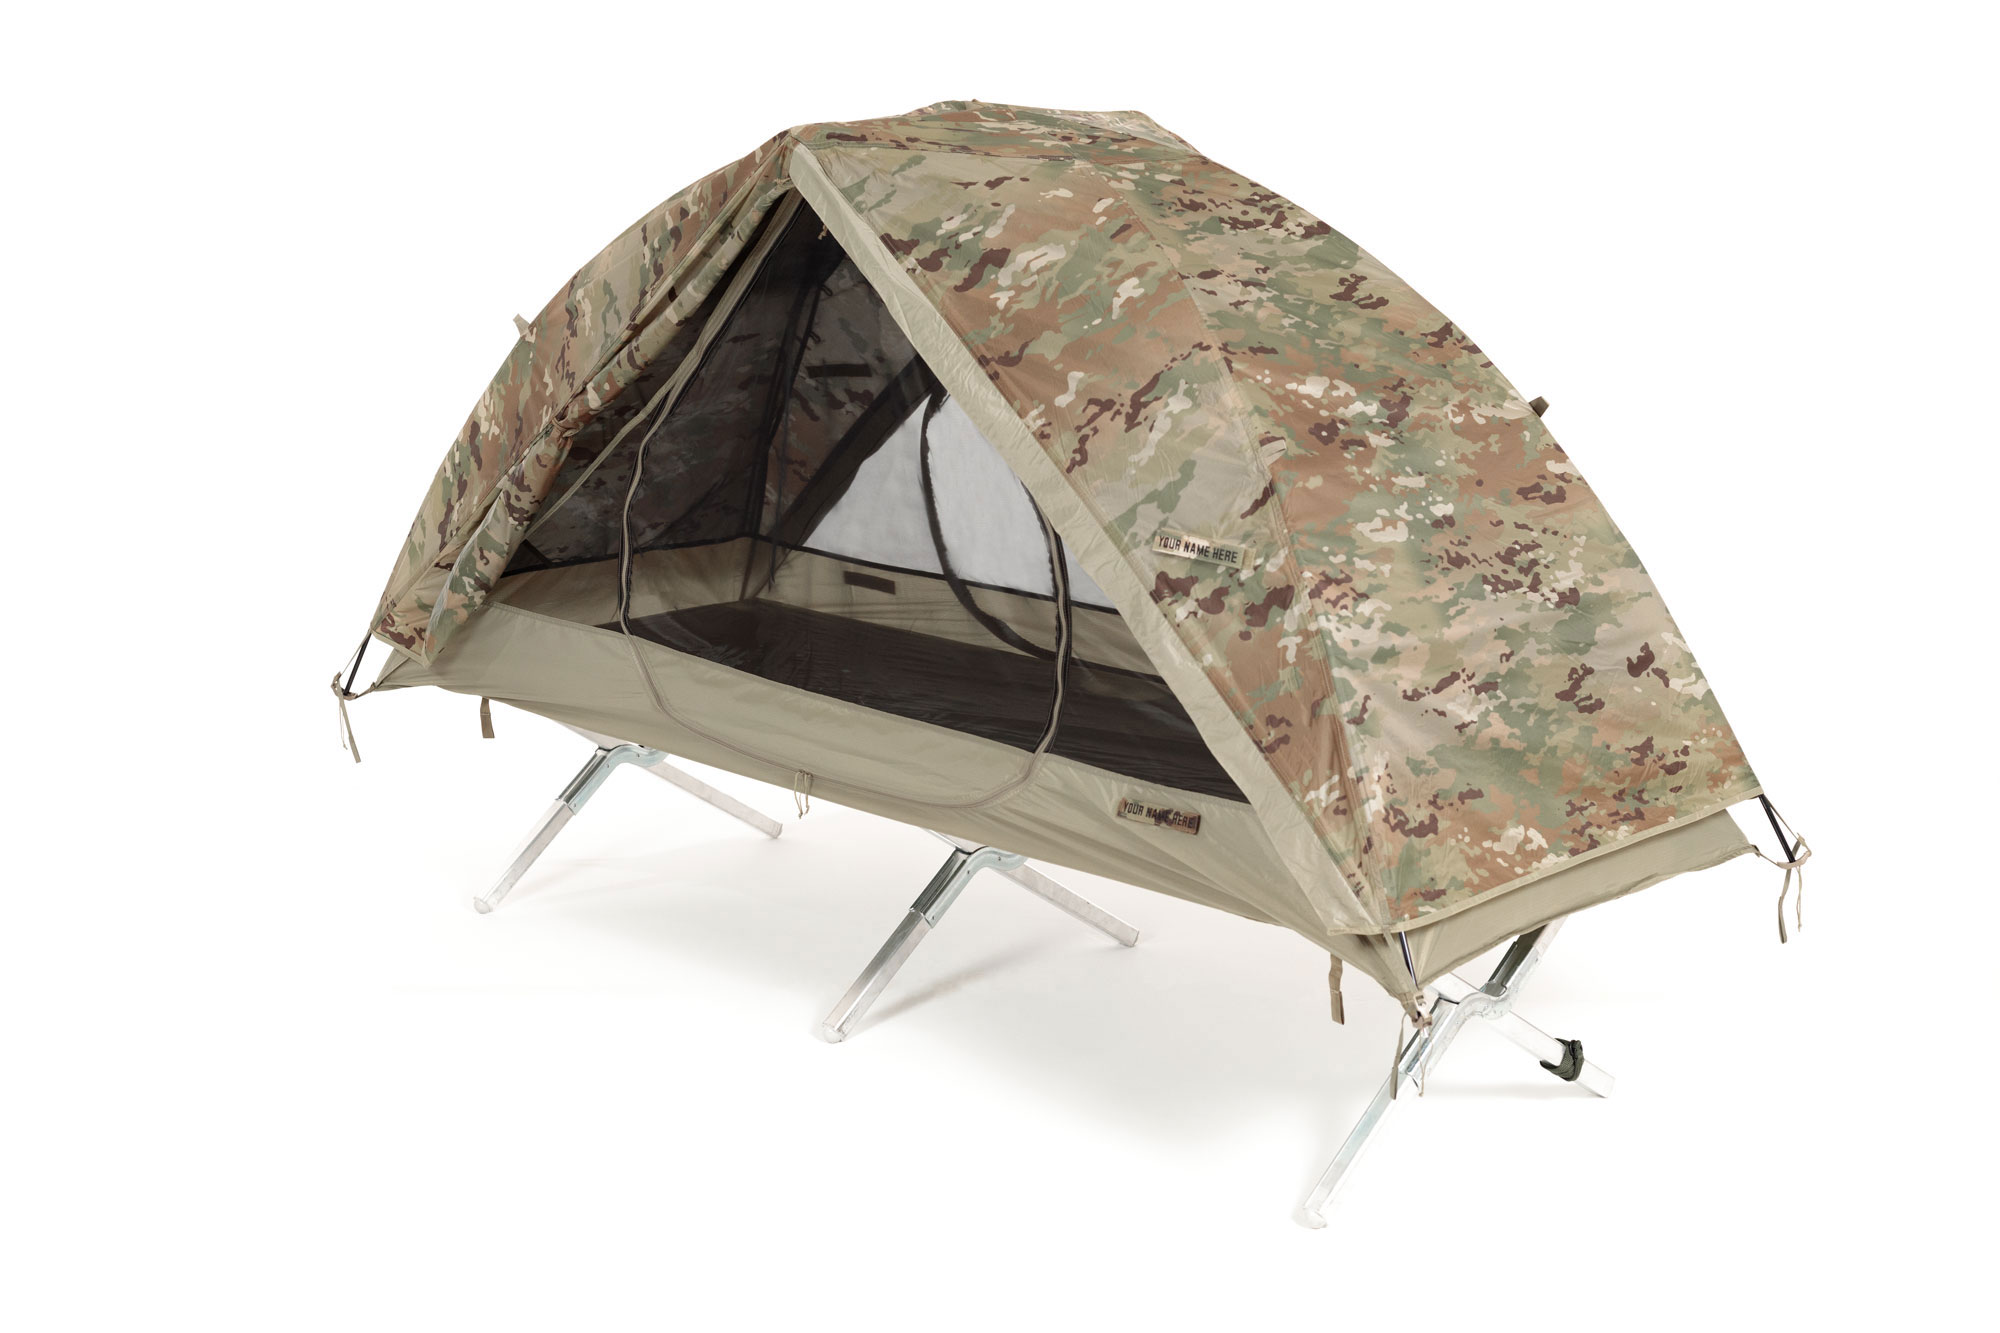 Army Cot Tent - Army Military